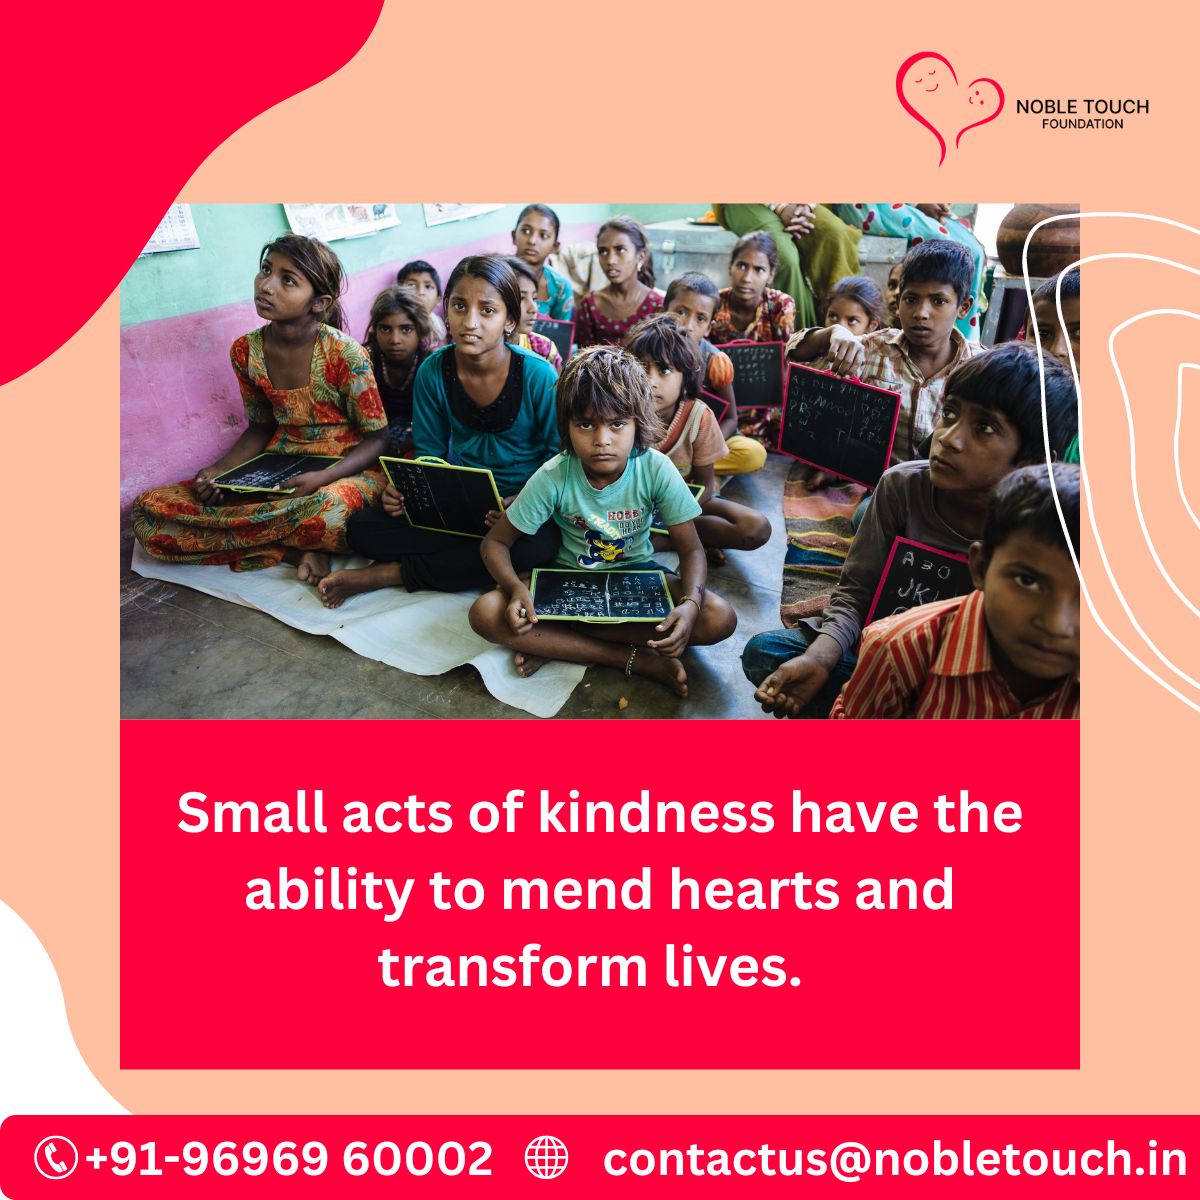 Embrace the strength of kindness, as it mends hearts and transforms lives. 

#ActsOfKindness #MakeADifference #TransformingLives #GivingBack #DonateForGood #EmpowerTheUnderprivileged #CaringCommunity #HealthcareForAll #EducationMatters #CreatingOpportunities #LoveAndCompassion